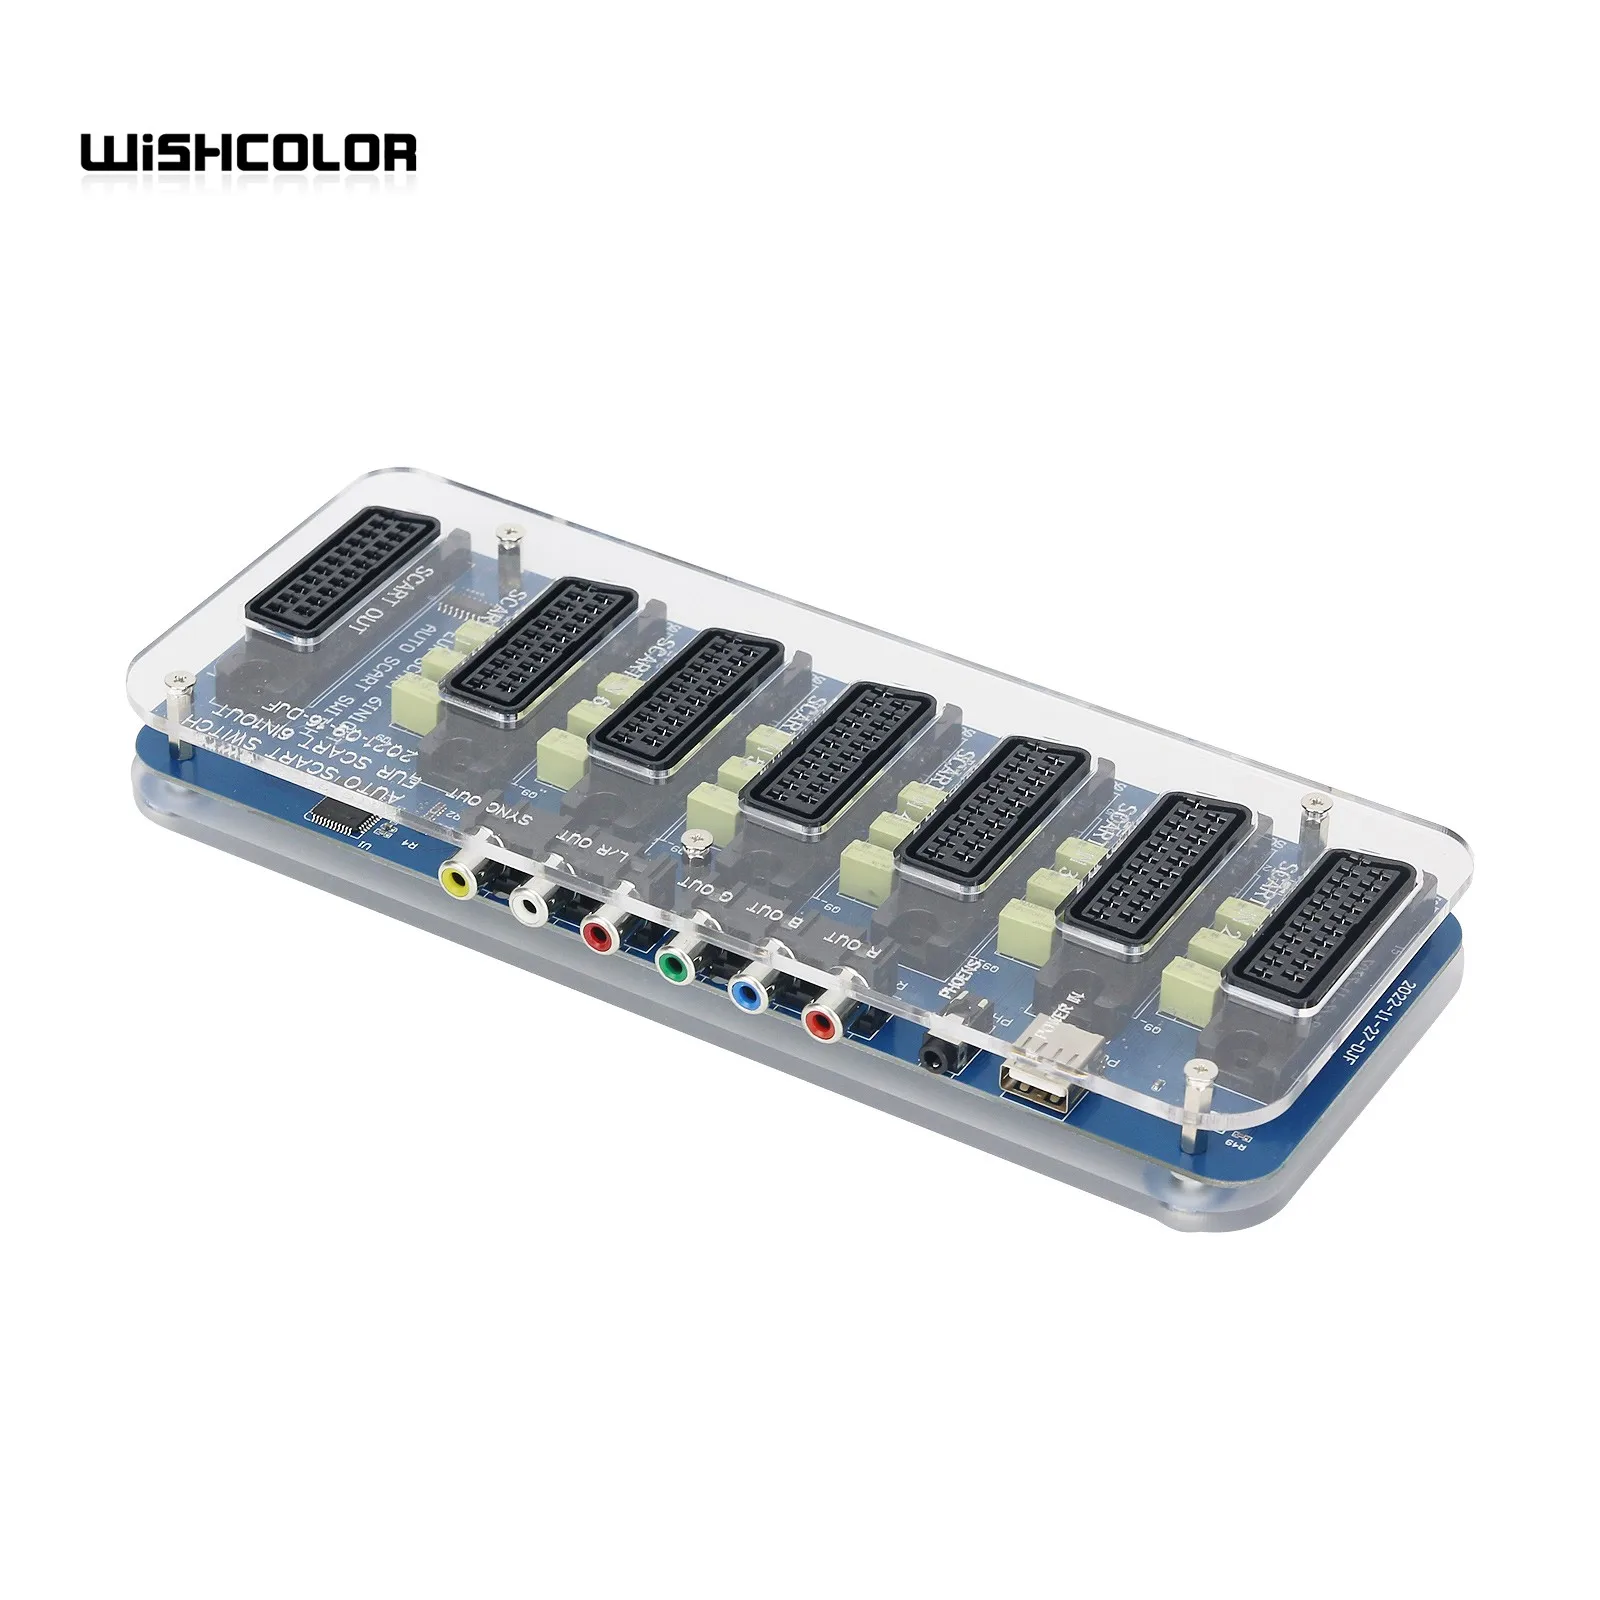 Wishcolor New acrilico Case SCART distributore Converter Video 6 Input 1 Output Automatic EUR Divider Board Device